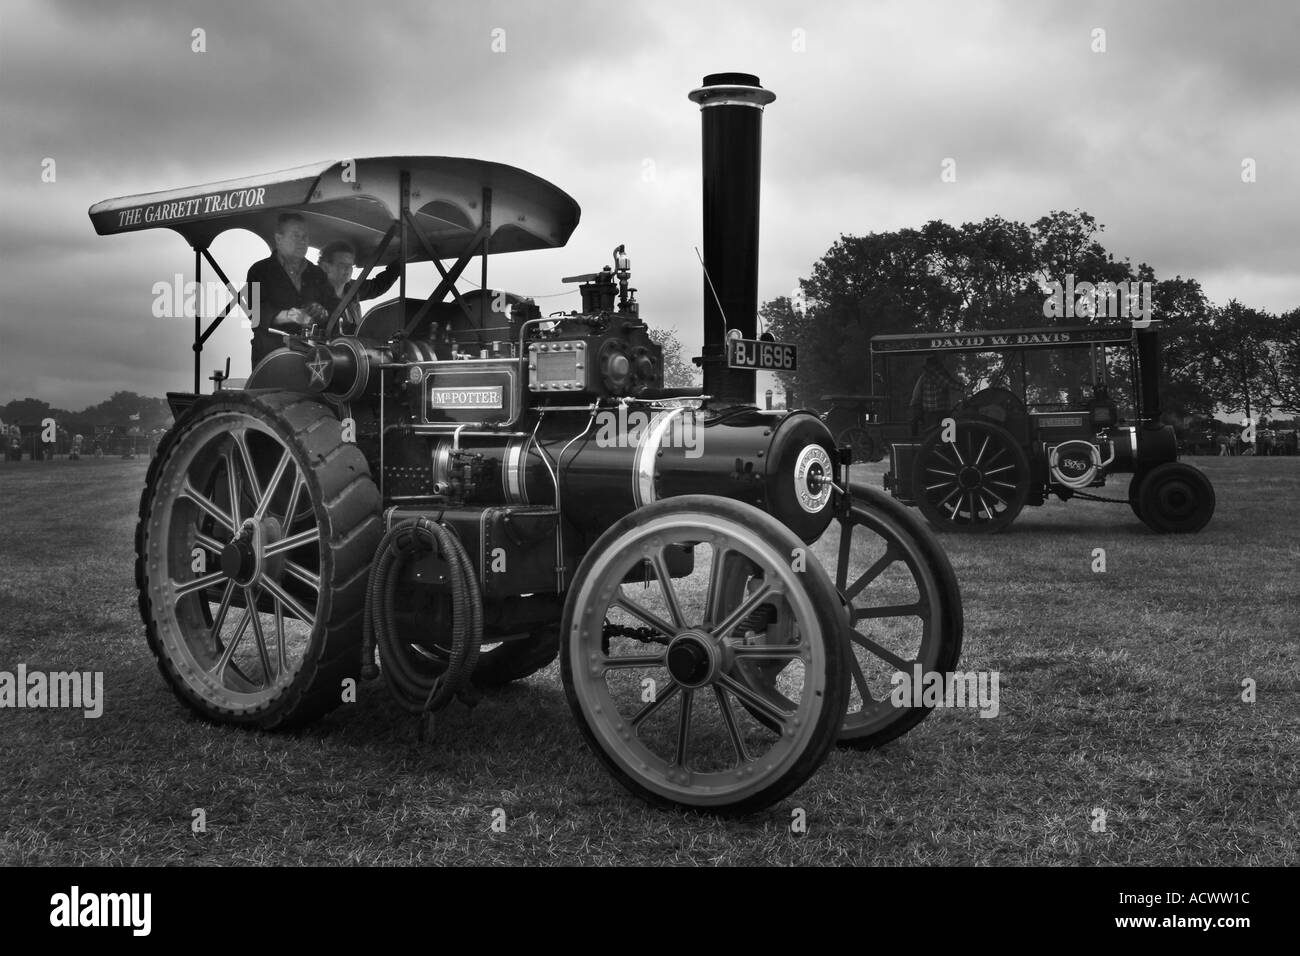 Prestwood Steam Fair Black and white traction engine. EDITORIAL USE ONLY Stock Photo